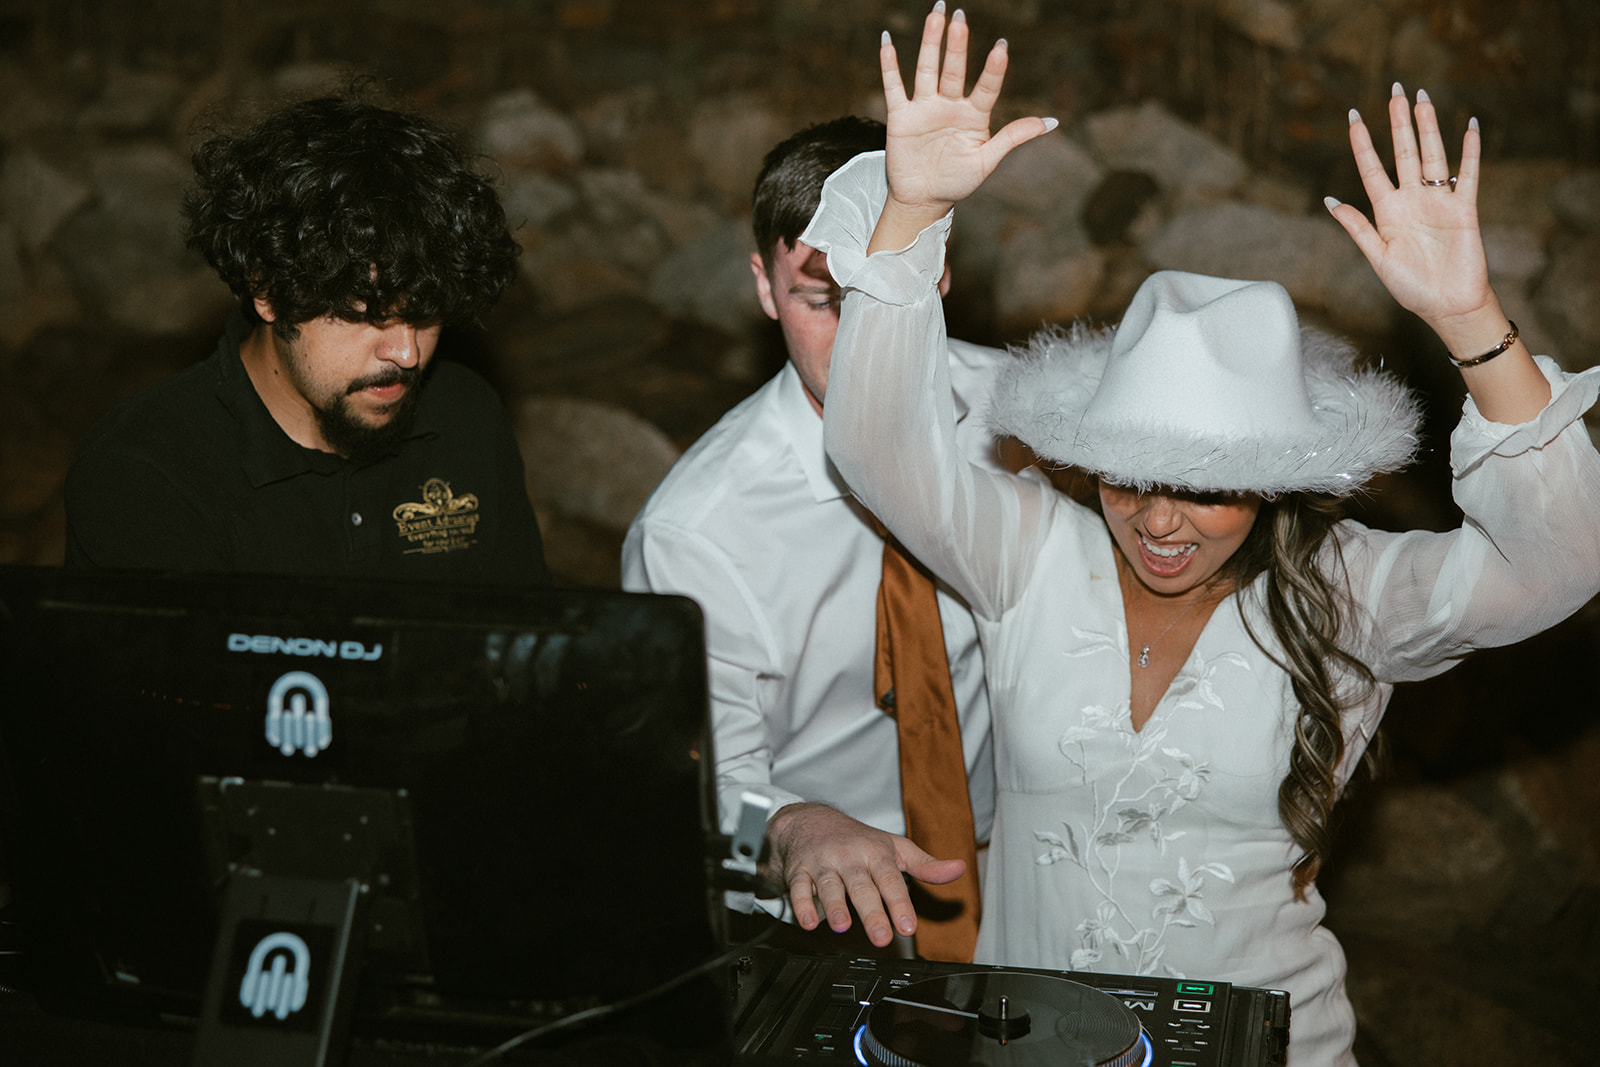 Bride and groom at dj booth